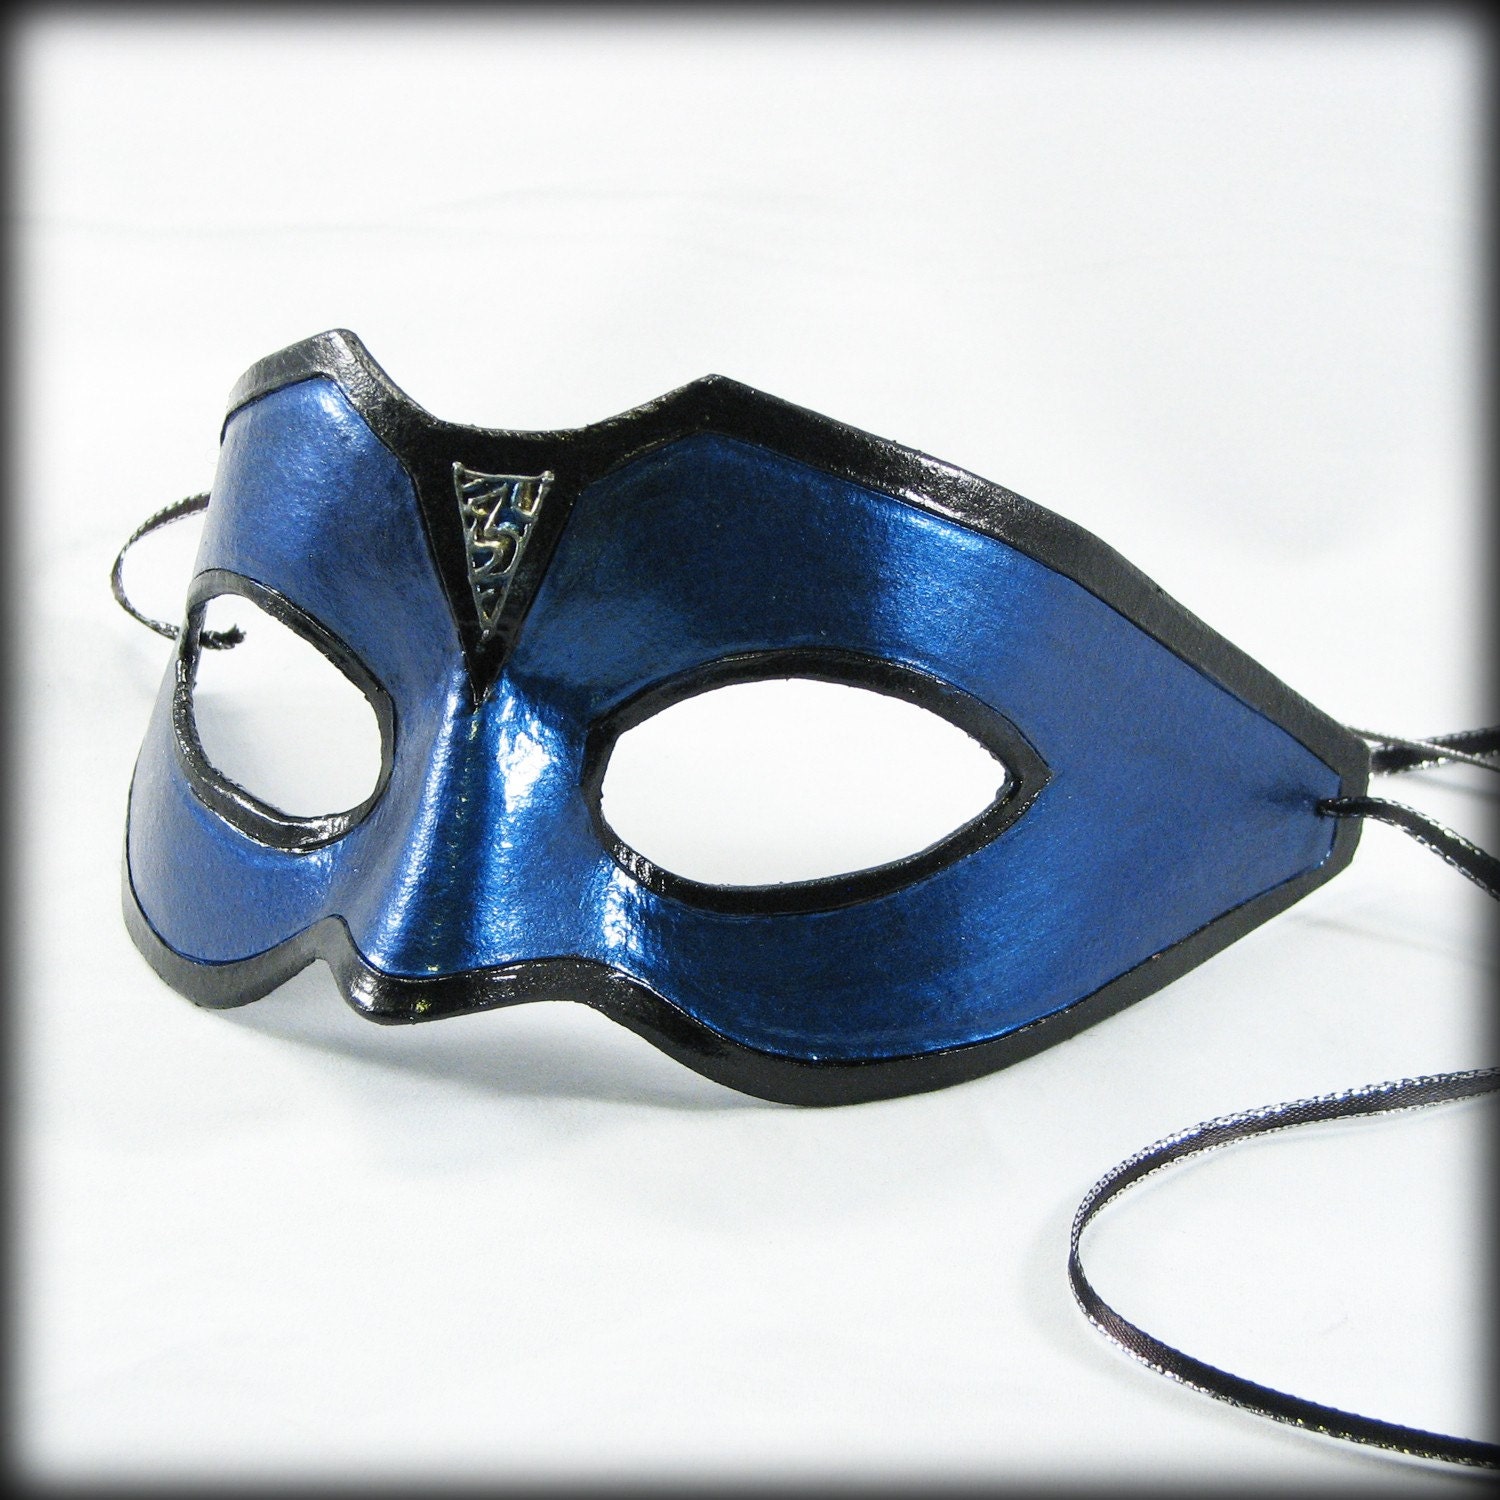 Bandit Mask in Blue and Black, Handmade Leather Mask